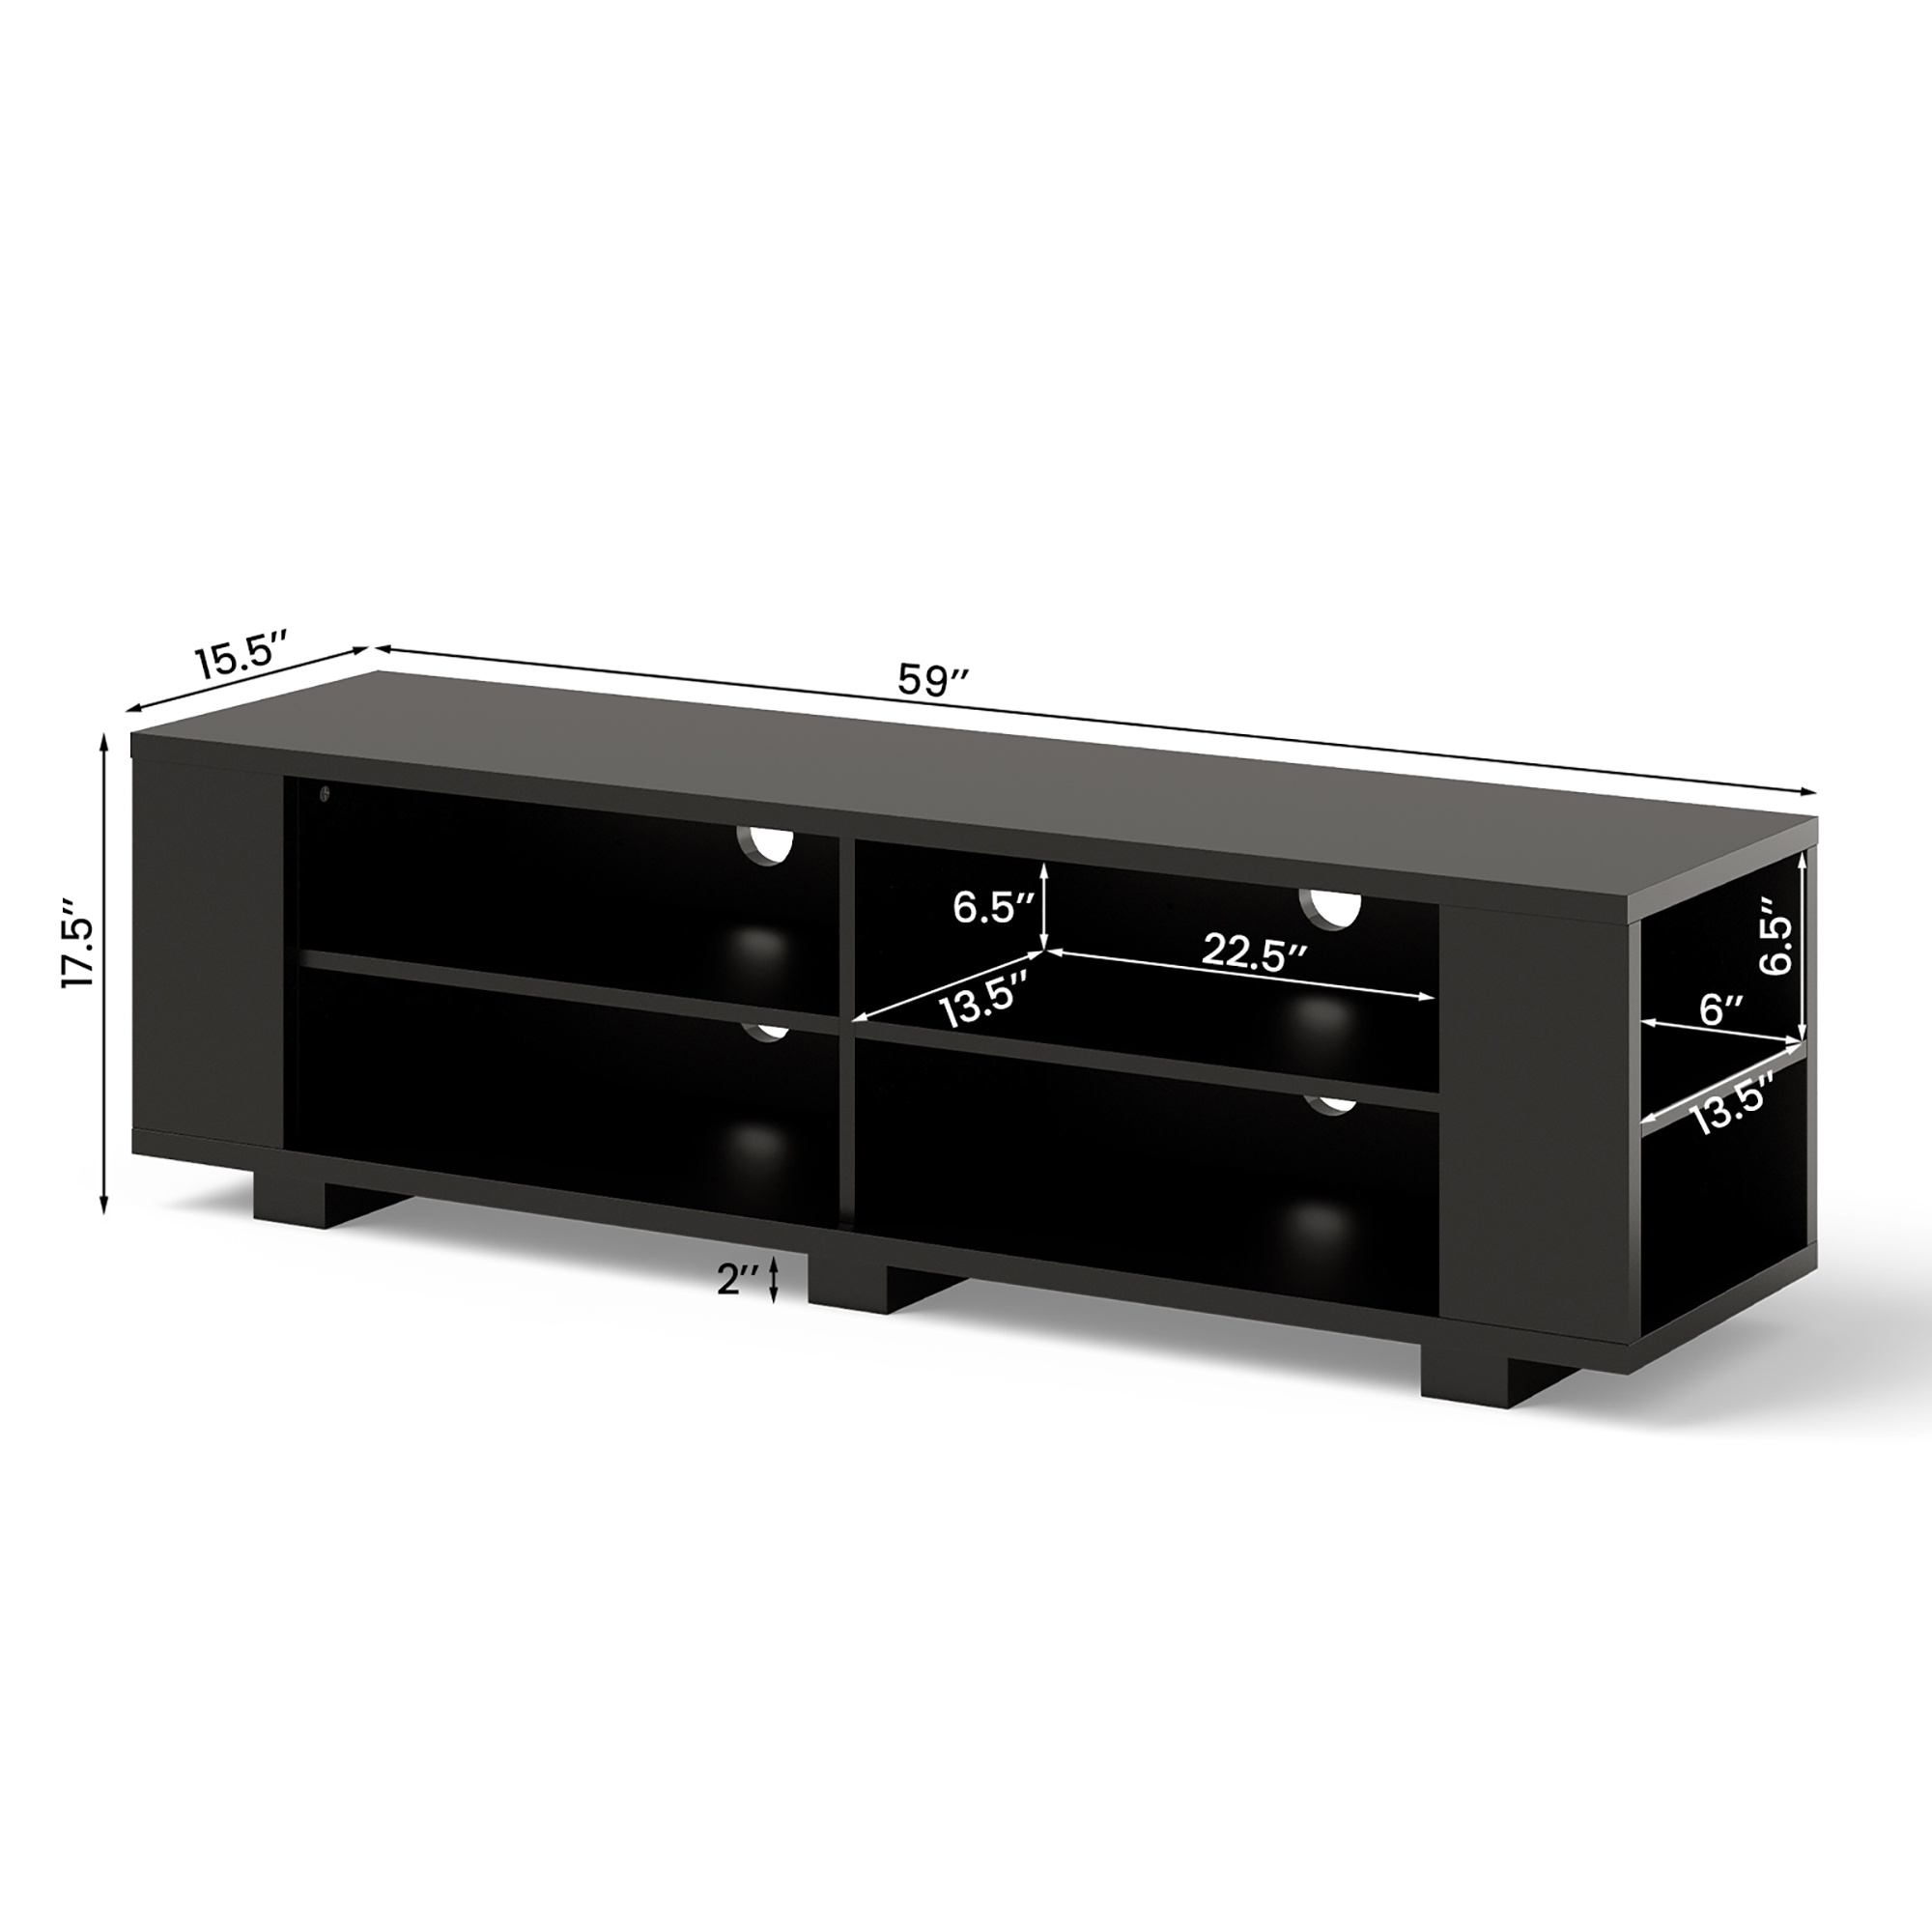 Costway 59'' Wood TV Stand Console Storage Entertainment Media Center w/ Adjustable Shelf Black - image 4 of 9